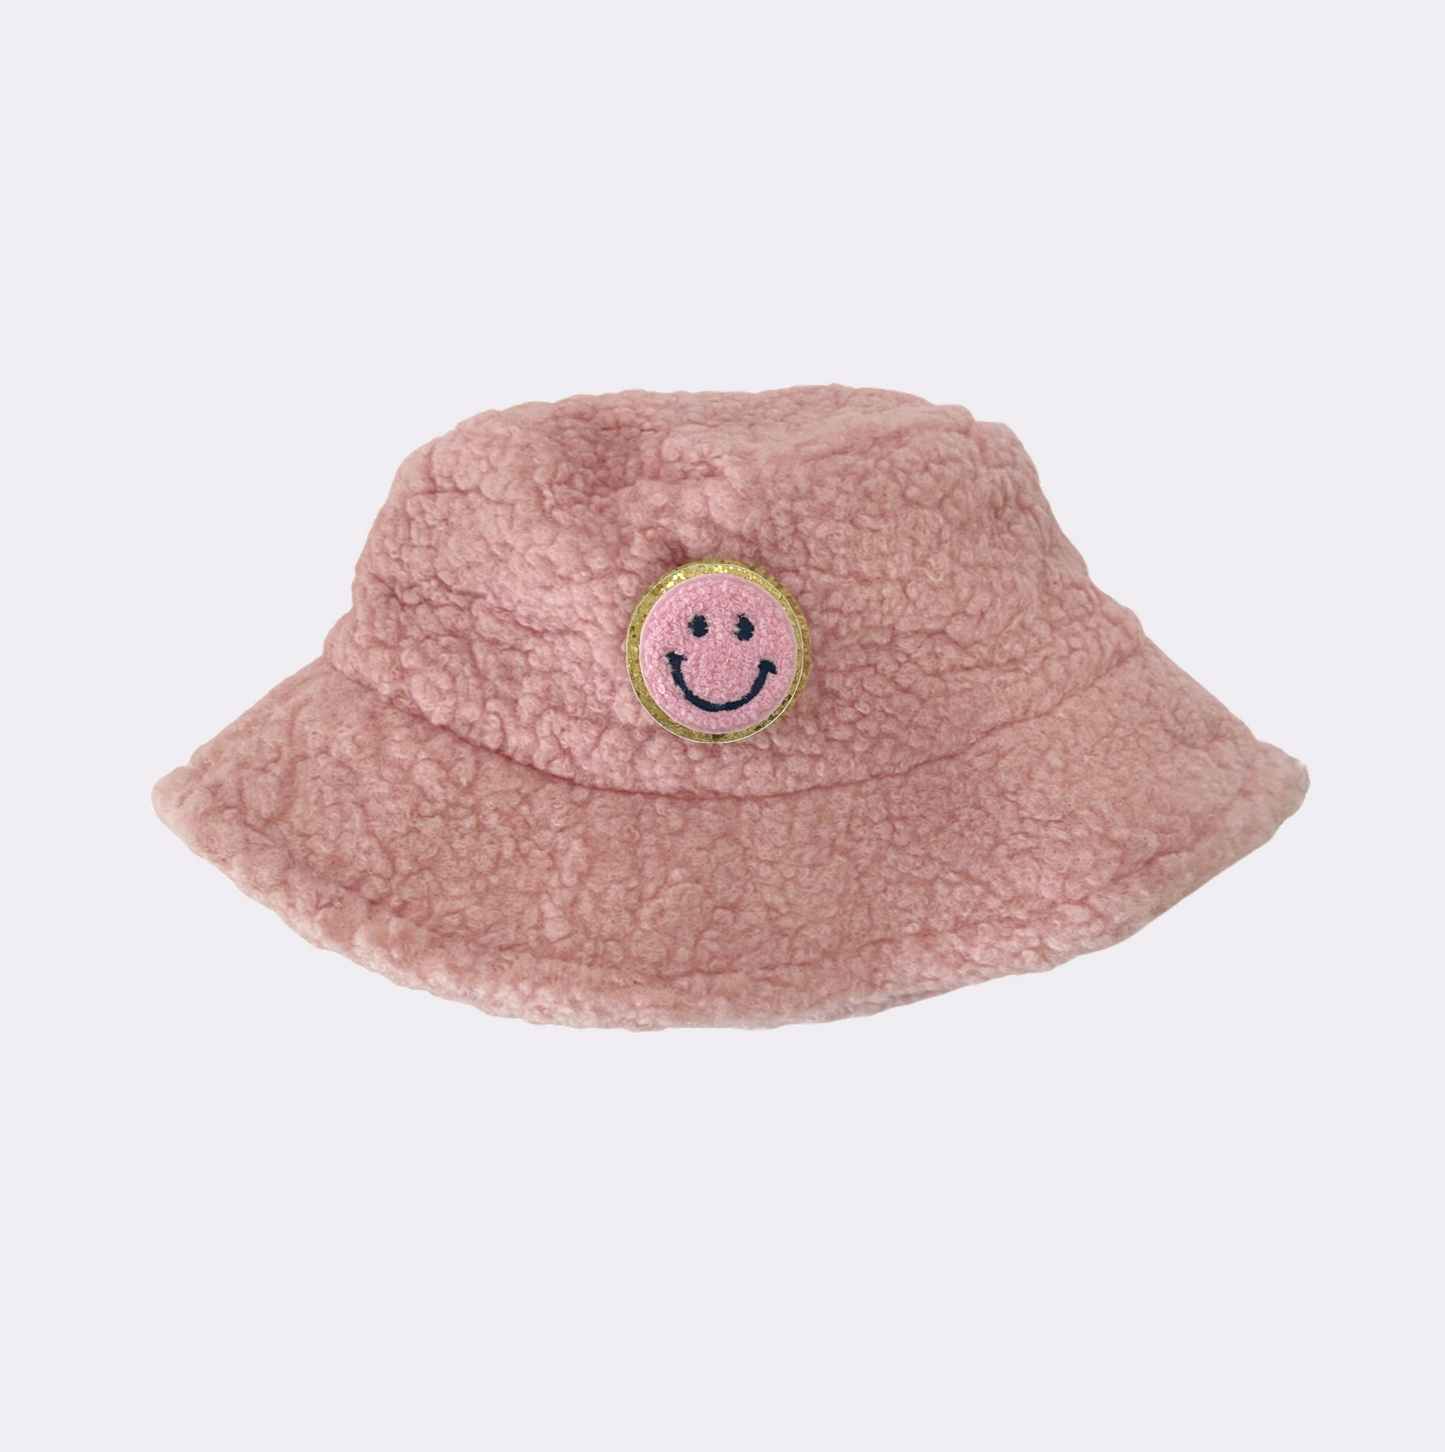 TEDDY BEAR BUCKETS ♡ kids bucket hat with smile patchy